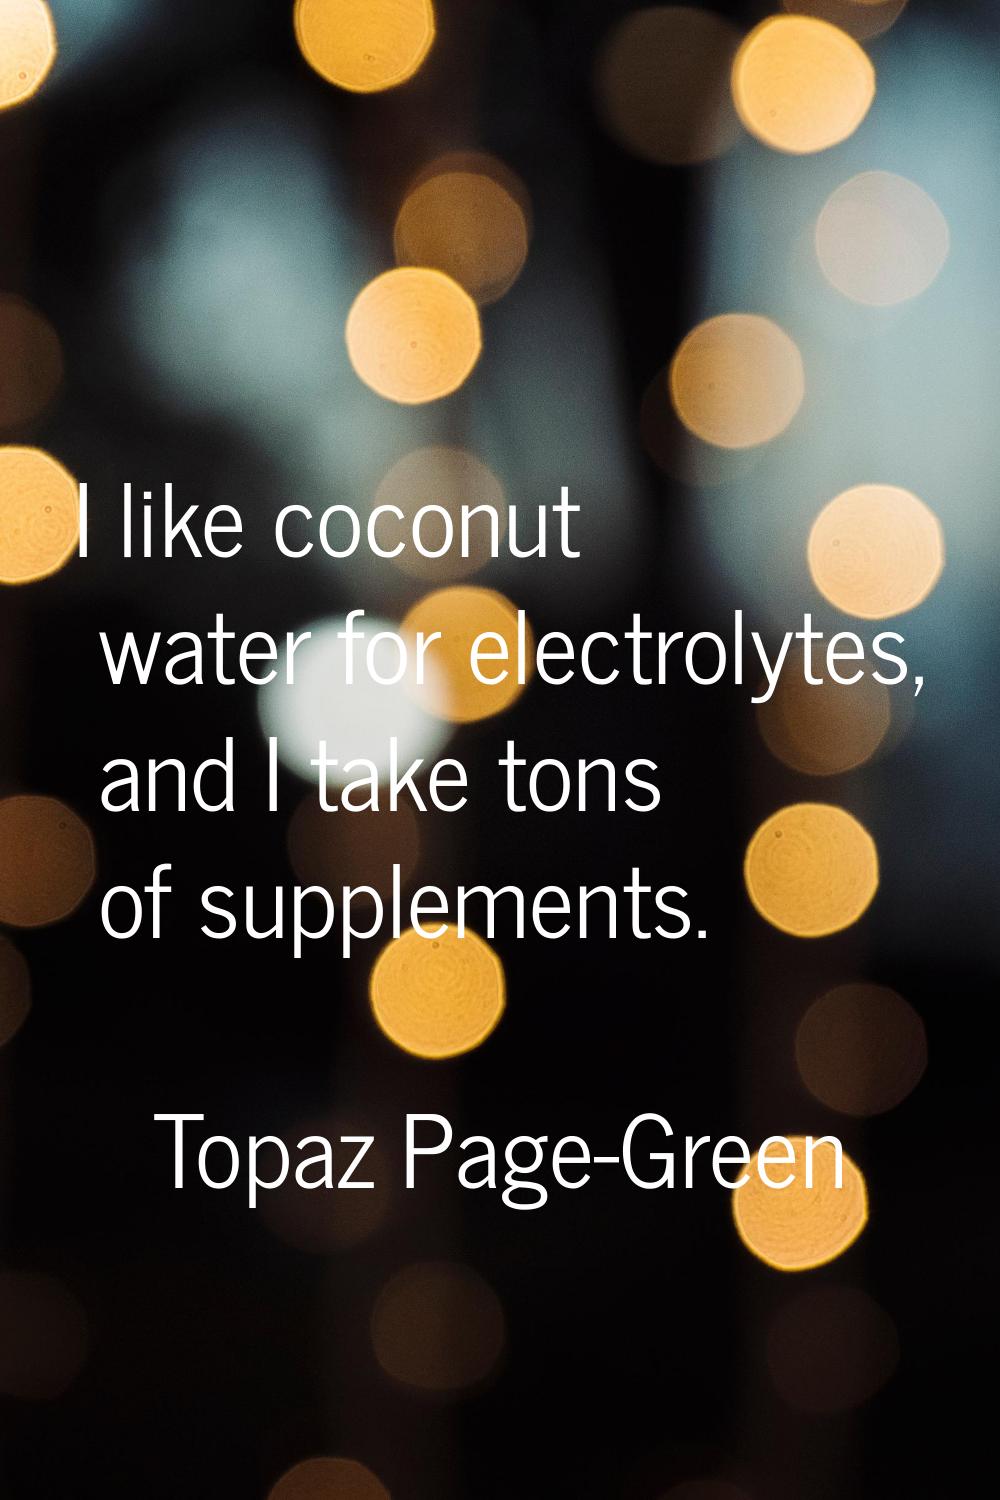 I like coconut water for electrolytes, and I take tons of supplements.